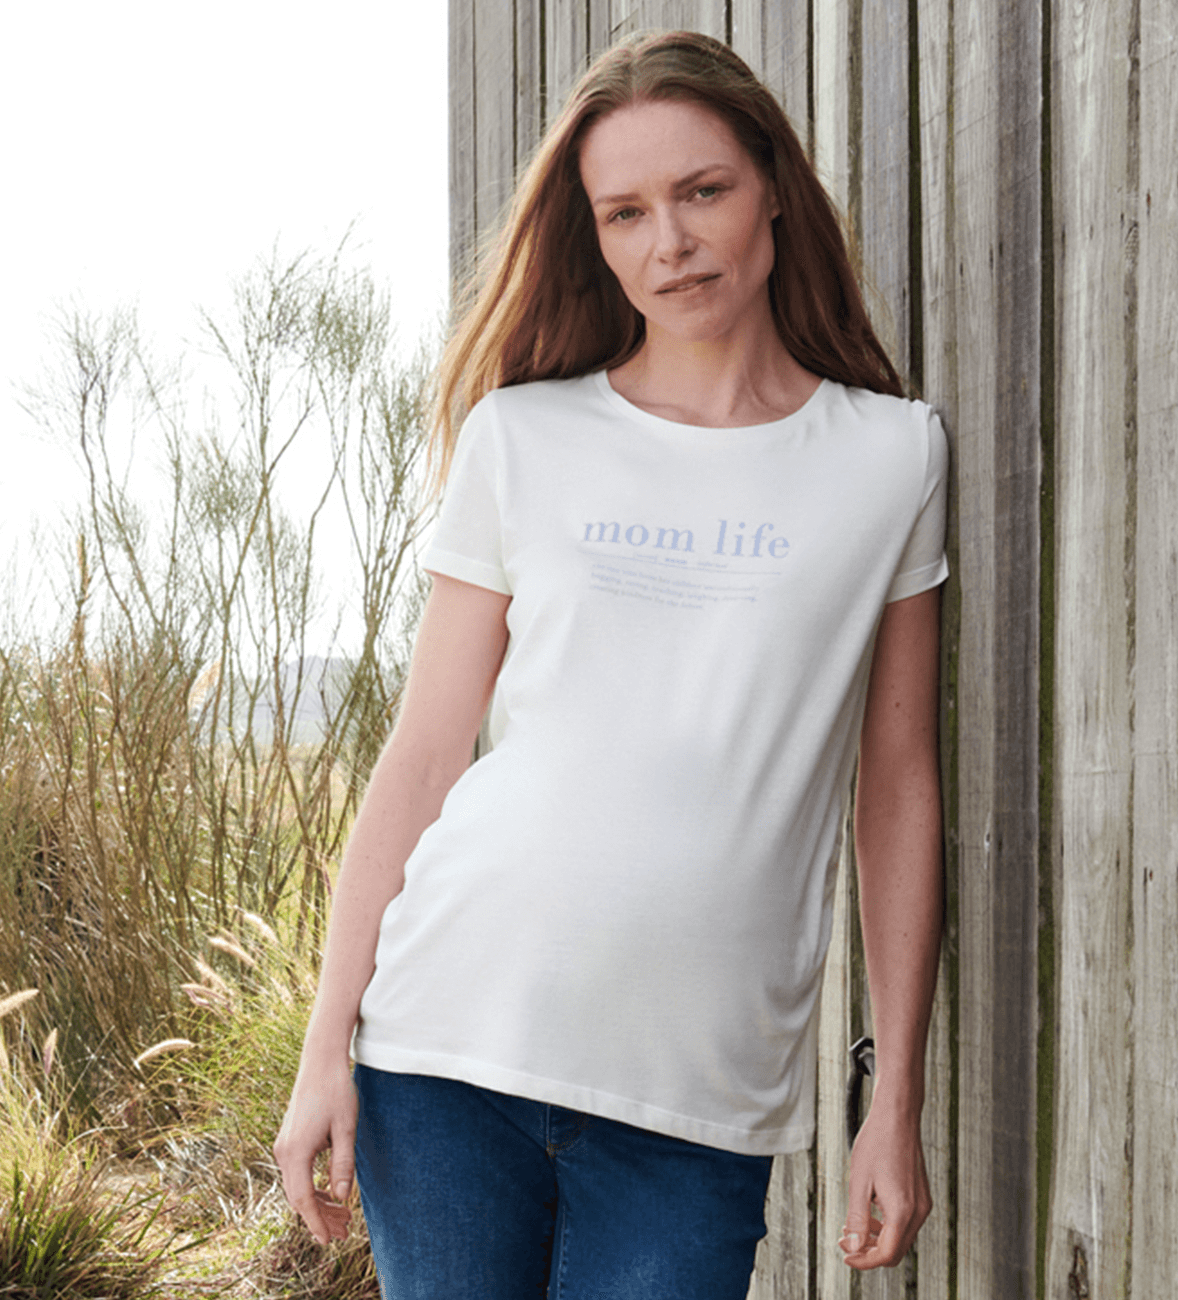 A woman in the third trimester wears maternity jeans and a casual top.